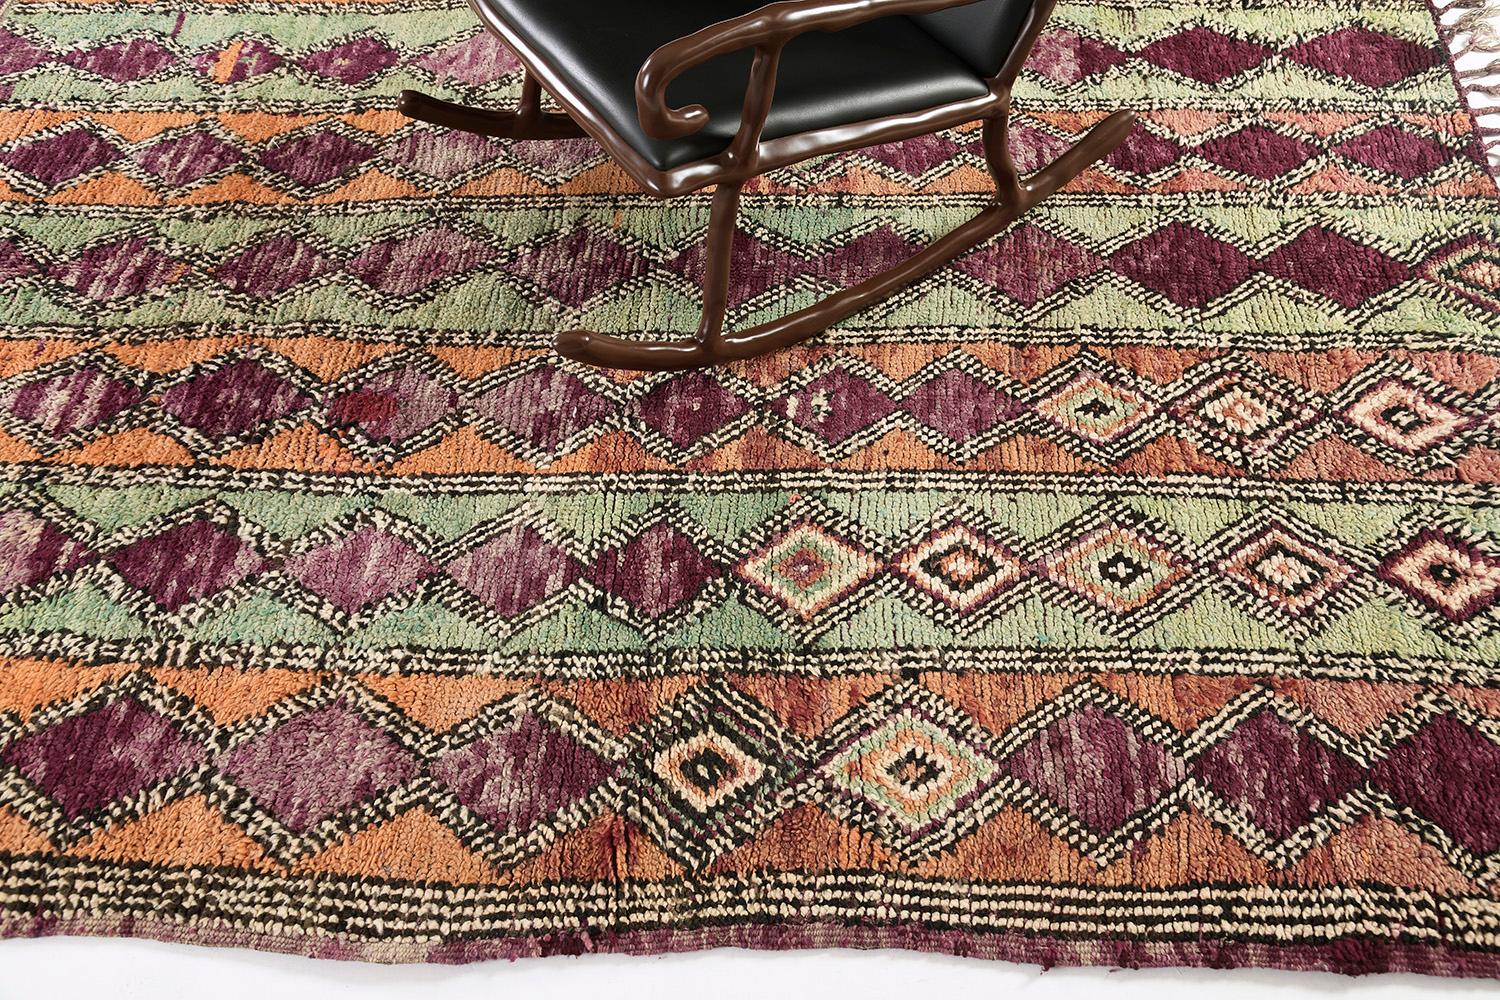 Emanating vibrant character, this inviting Vintage Moroccan Beni Ourain Berber rug provides an engaging design and aesthetic lively color scheme. It features a pattern of X motifs forming series of lozenge trellis running in the alternating lengths